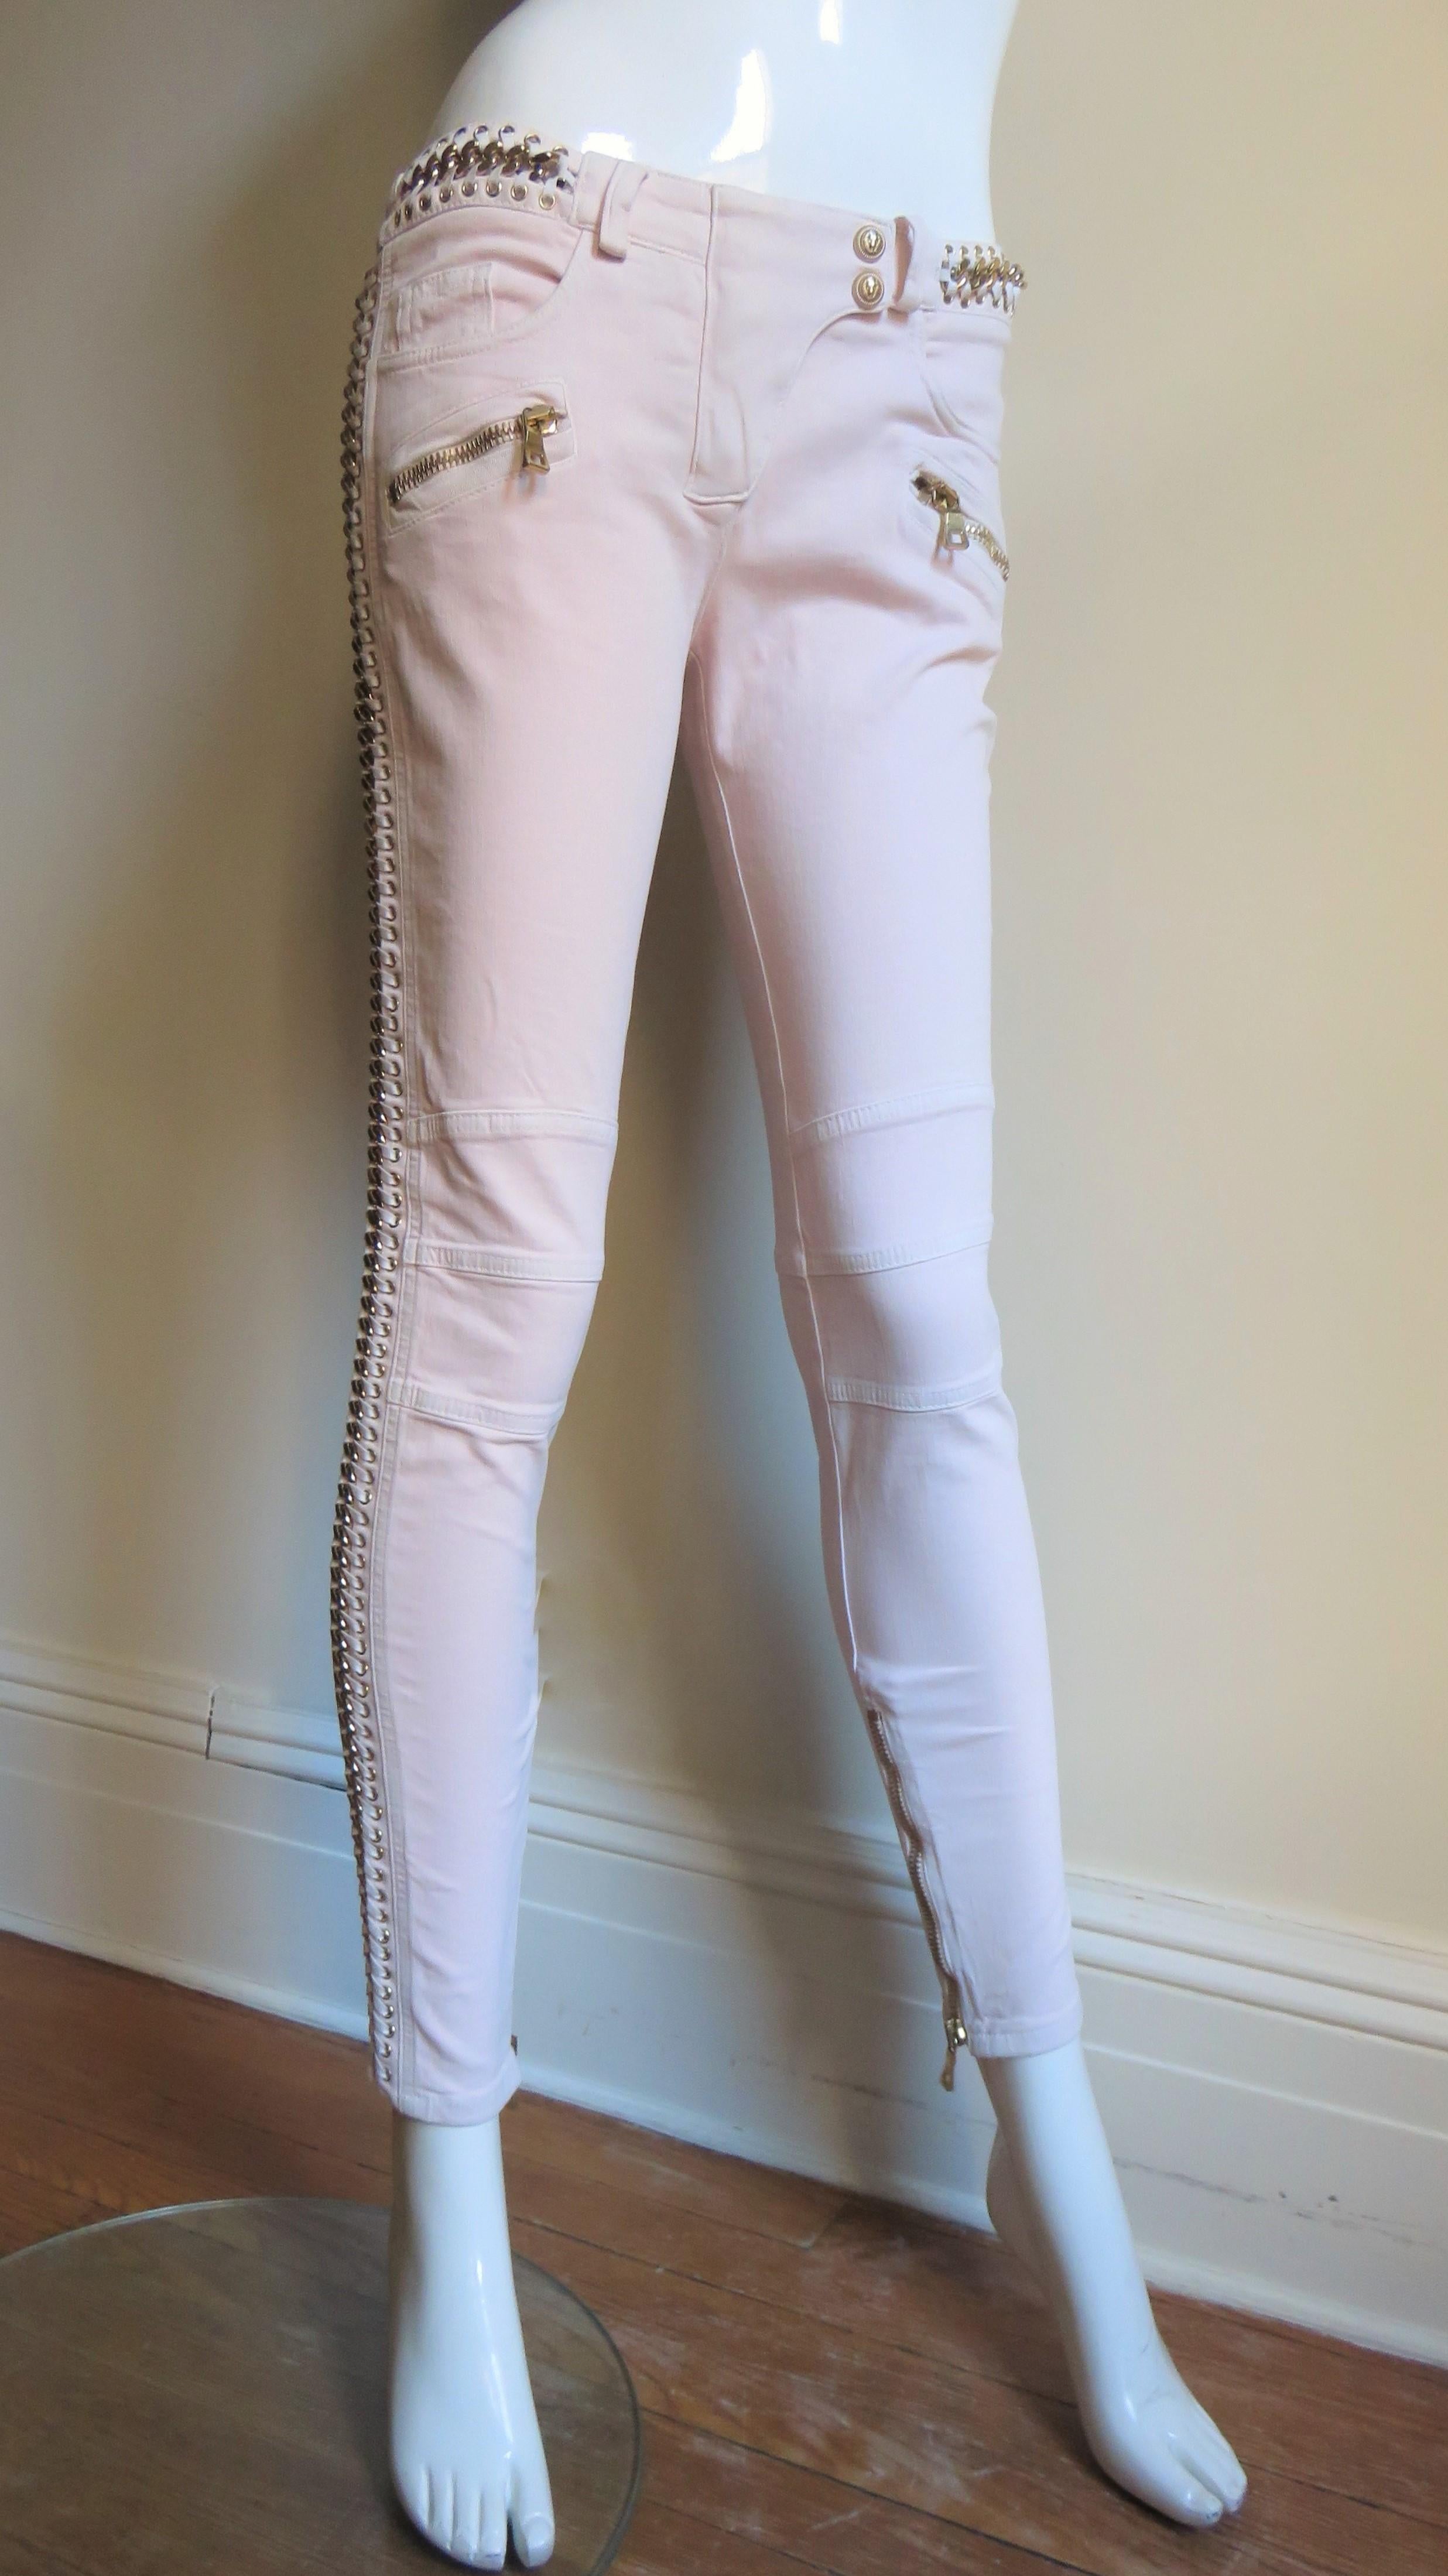 Fabulous baby pink cotton denim jeans with a bit of stretch from Balmain.  It has the Balmain jean signature horizontal seaming at the knees, 5 front pockets including zipper pockets, 2 zipper back pockets and zippers at the ankles of the tapered